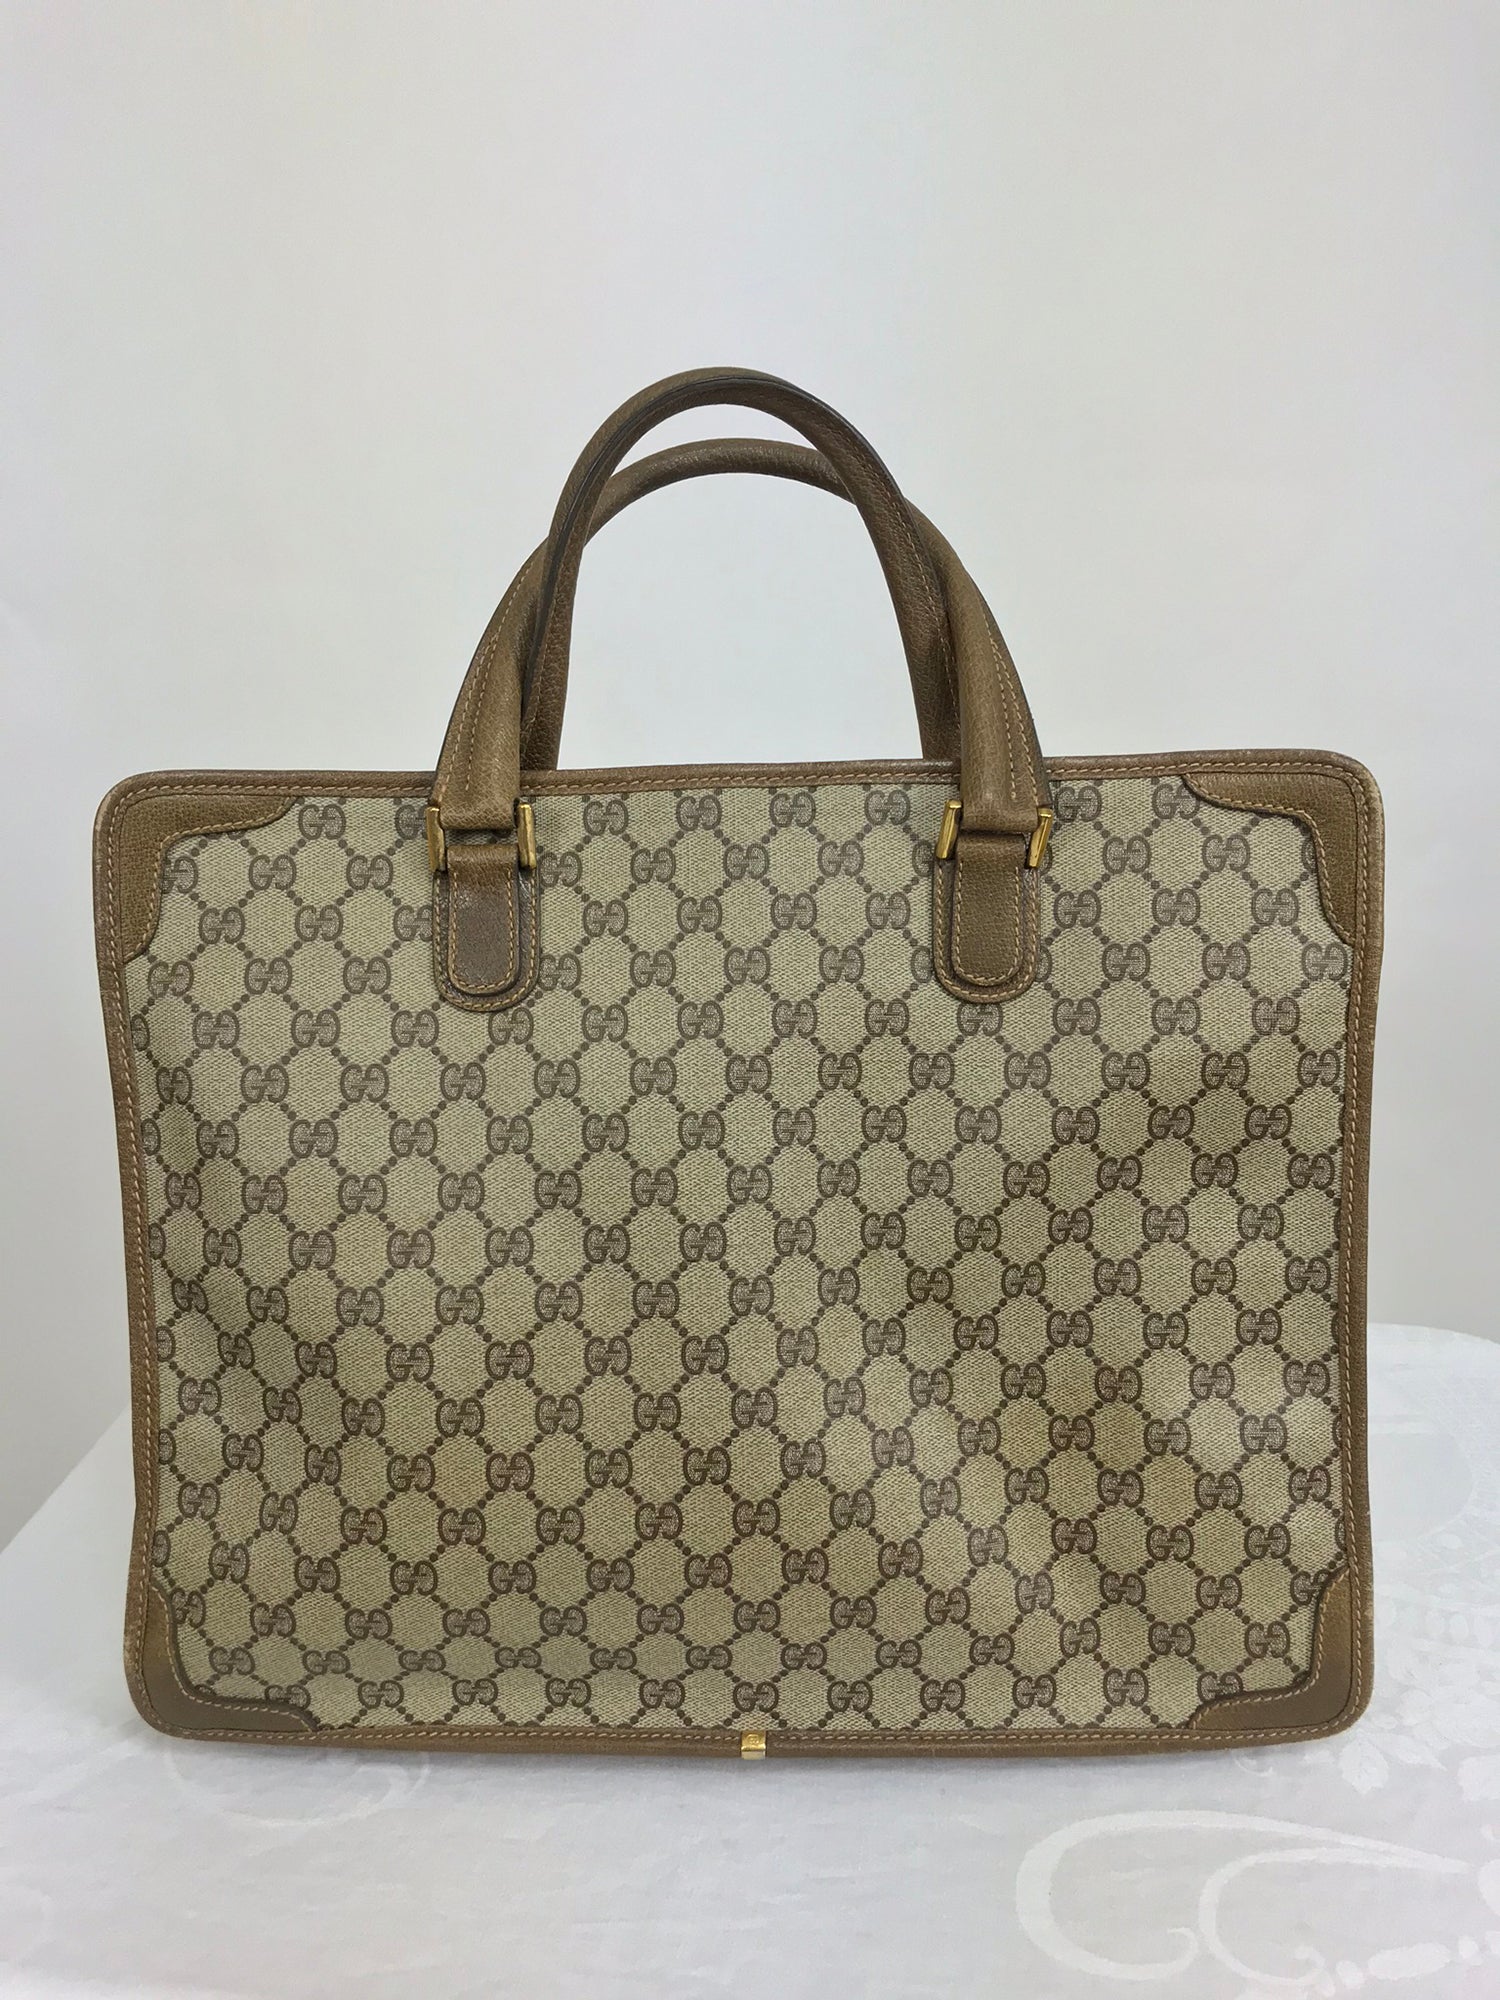 Luxurious Gucci Large Tote Bag